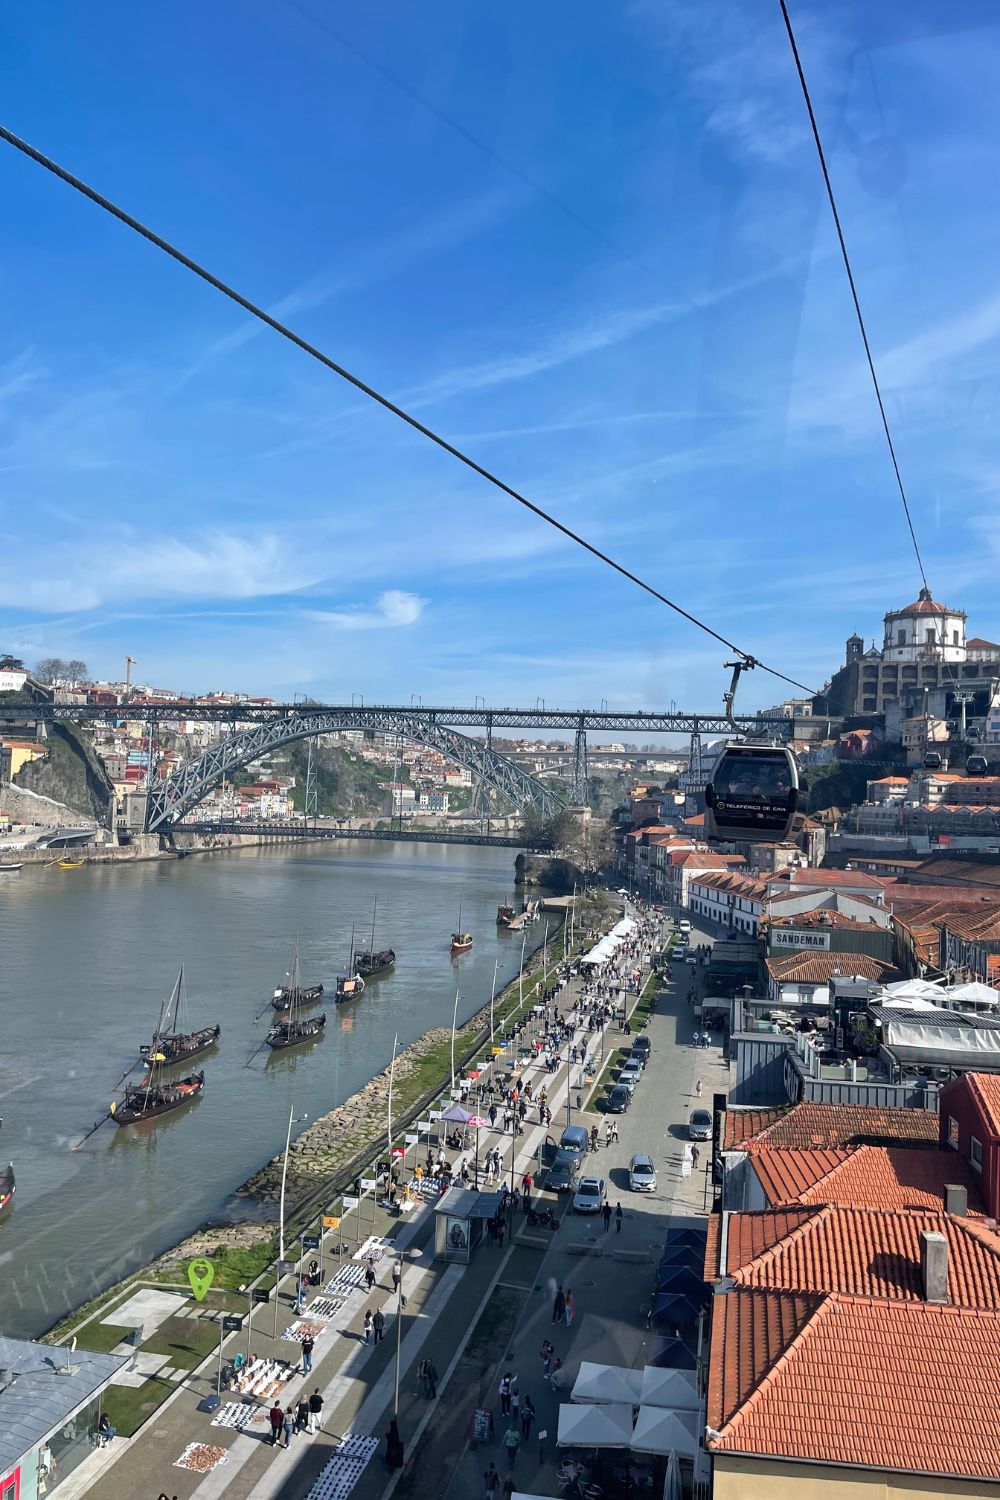 A cable car glides over the Douro River offering panoramic views of Porto's landscape, including the iconic double-decked Dom Luís I Bridge and traditional Rabelo boats.